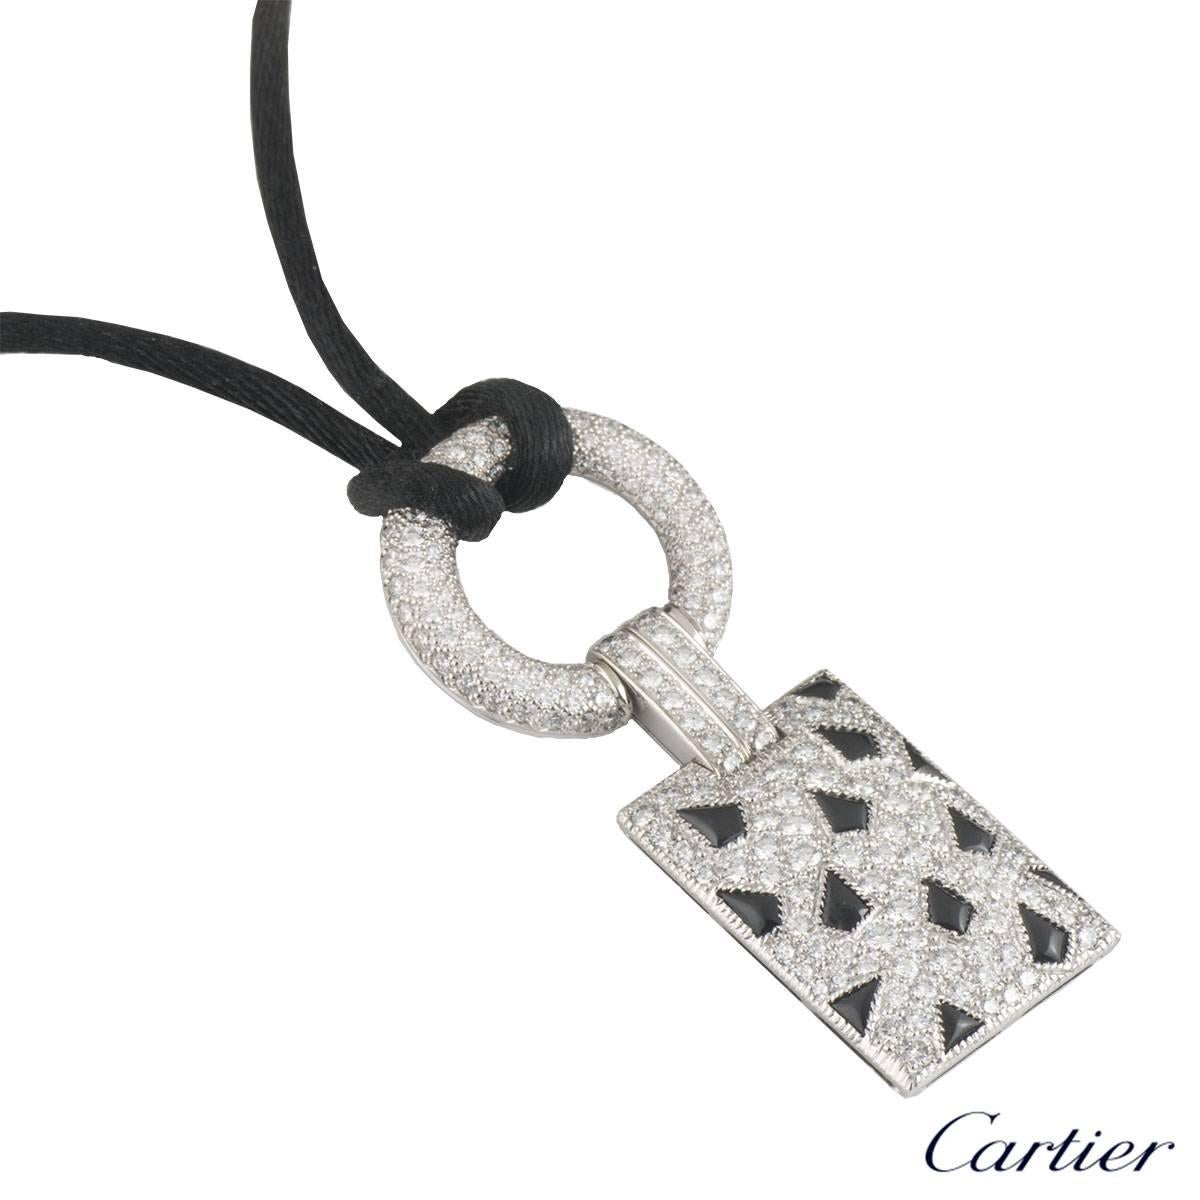 A beautiful 18k white gold necklace by Cartier from the Panthere de Cartier collection. The pendant features an open circle with a double bar link connecting to a rectangular motif set with round brilliant cut diamonds and onyx in a pave setting.